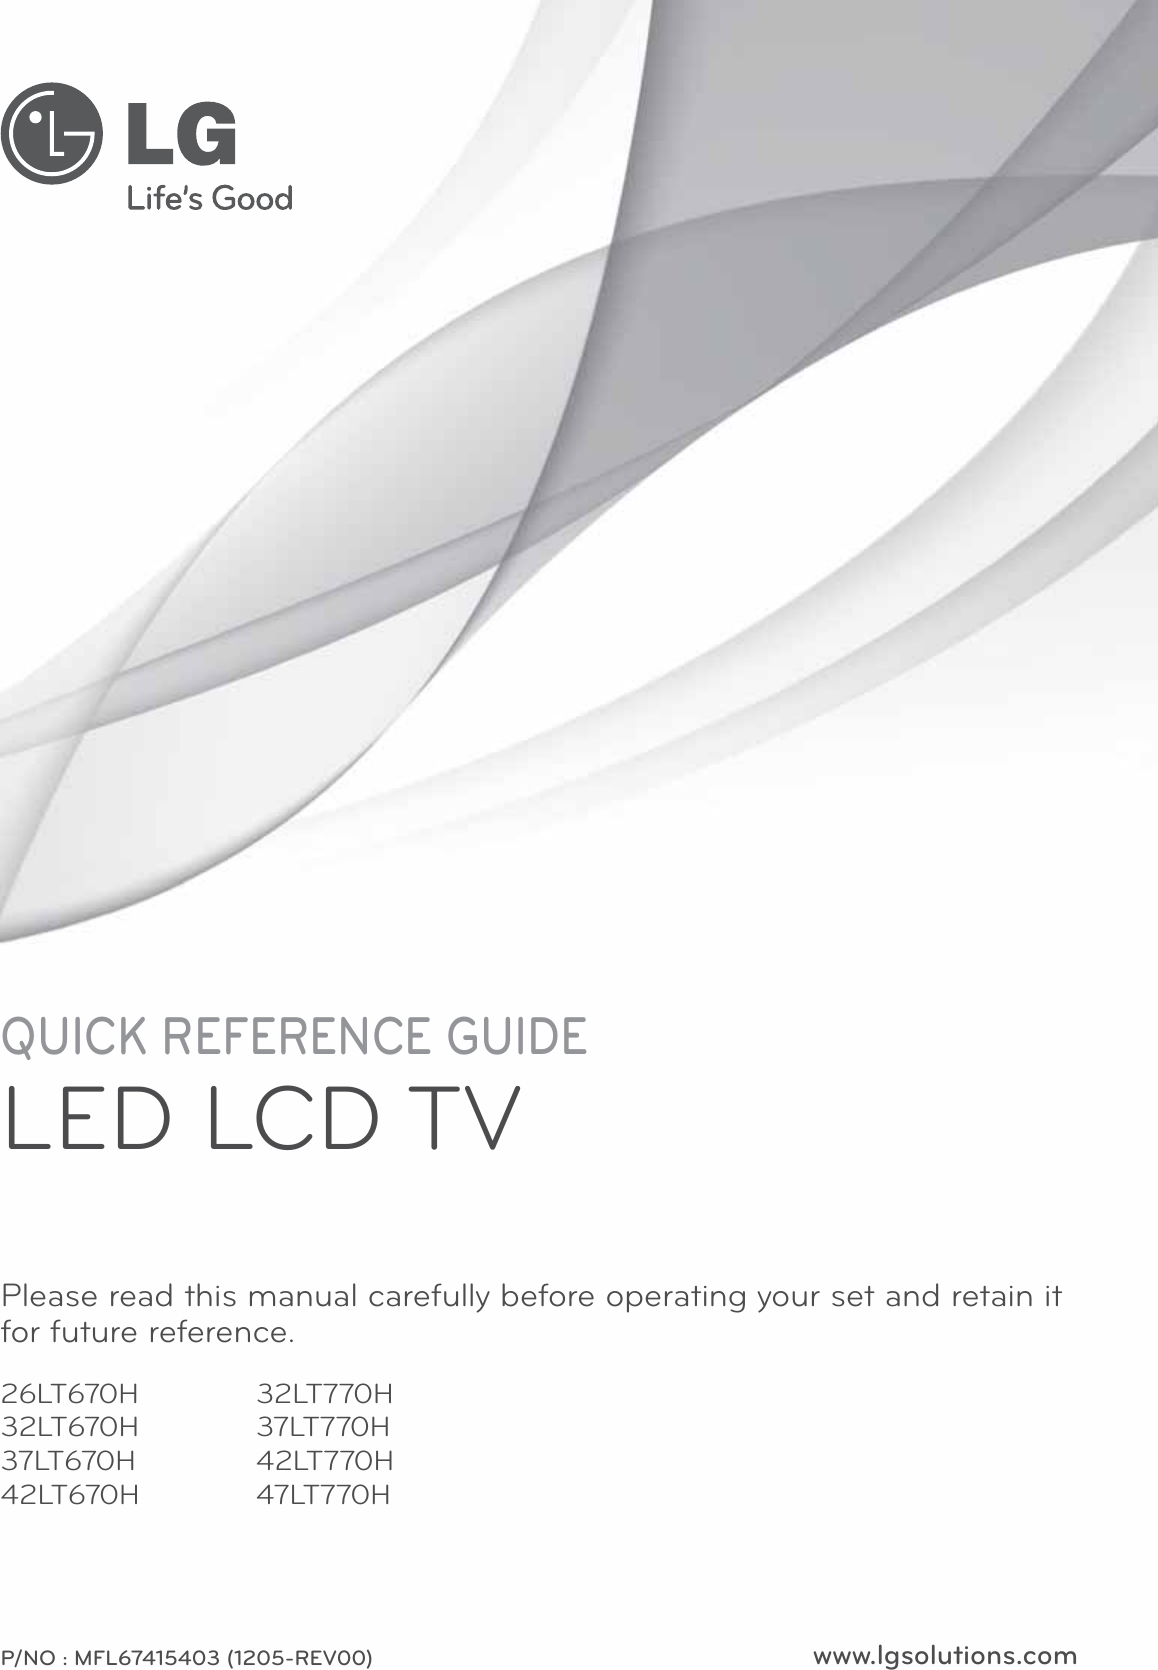 www.lgsolutions.comQUICK REFERENCE GUIDELED LCD TVPlease read this manual carefully before operating your set and retain it for future reference.P/NO : MFL67415403 (1205-REV00)26LT670H32LT670H37LT670H42LT670H32LT770H37LT770H42LT770H47LT770H